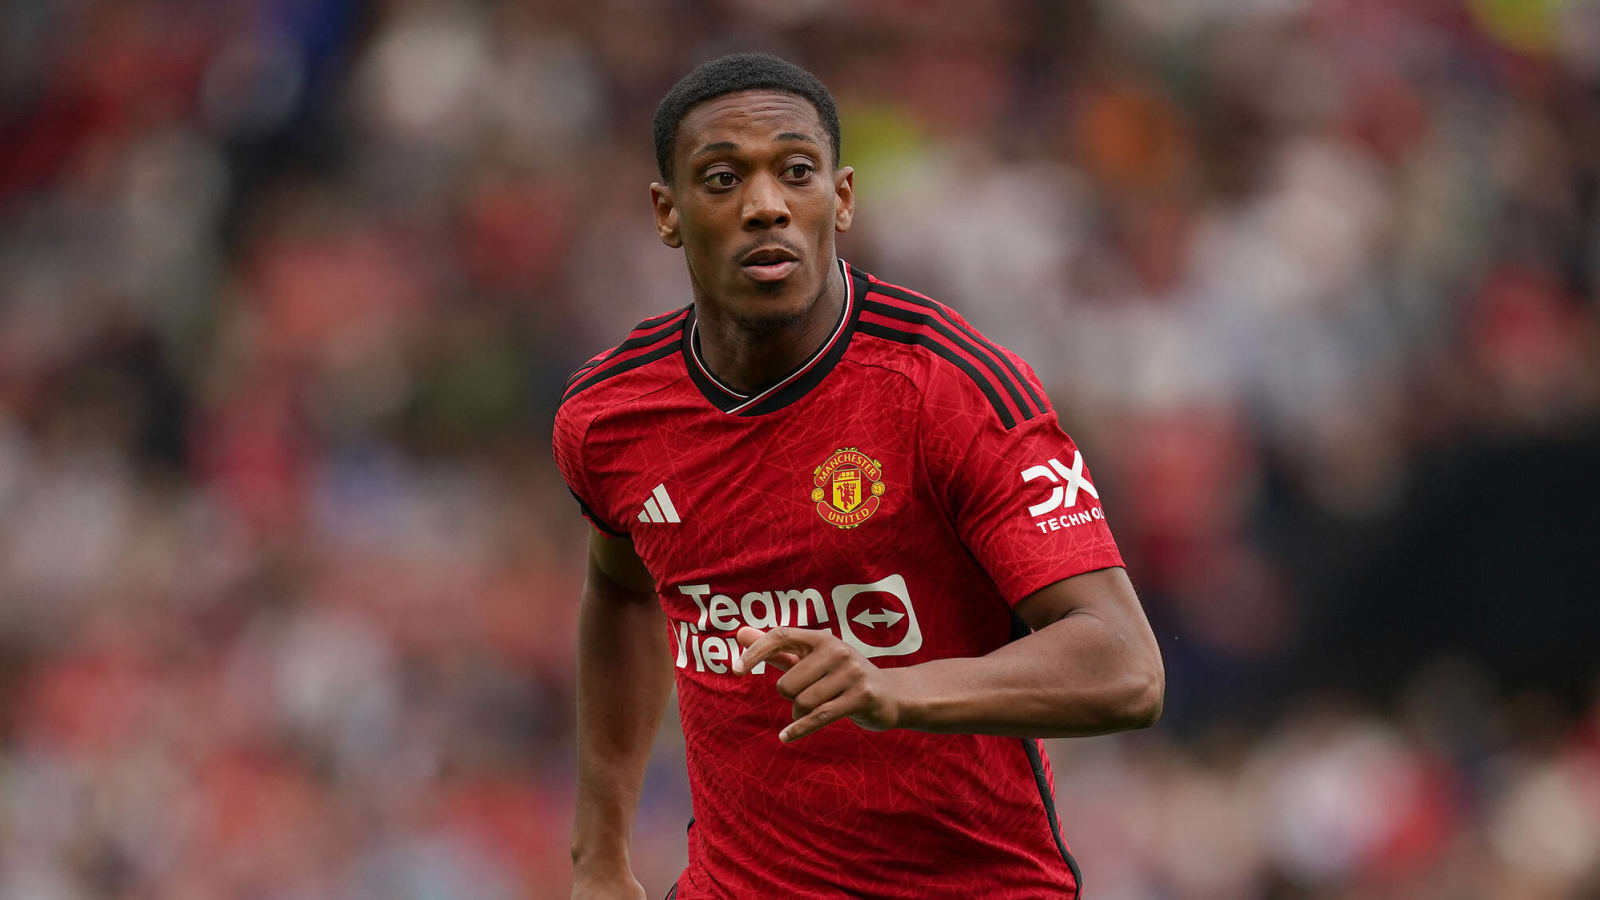 ‘No doubts’: Romano confirms £250k p/w United man will leave this summer